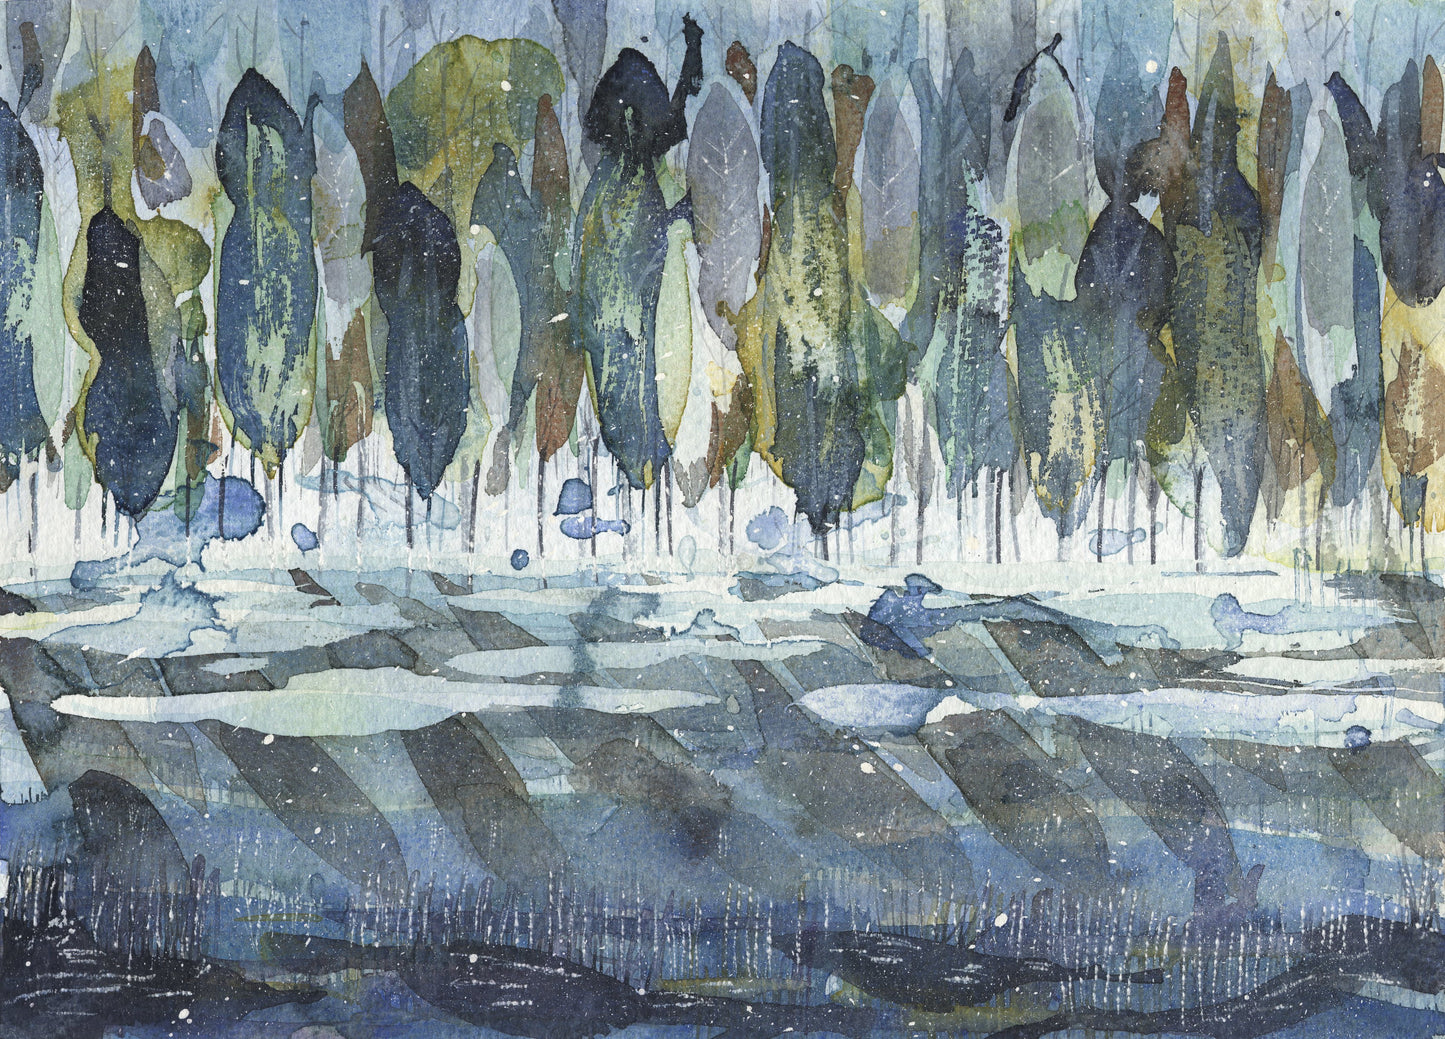 SALE - Winter Forest - Original Painting